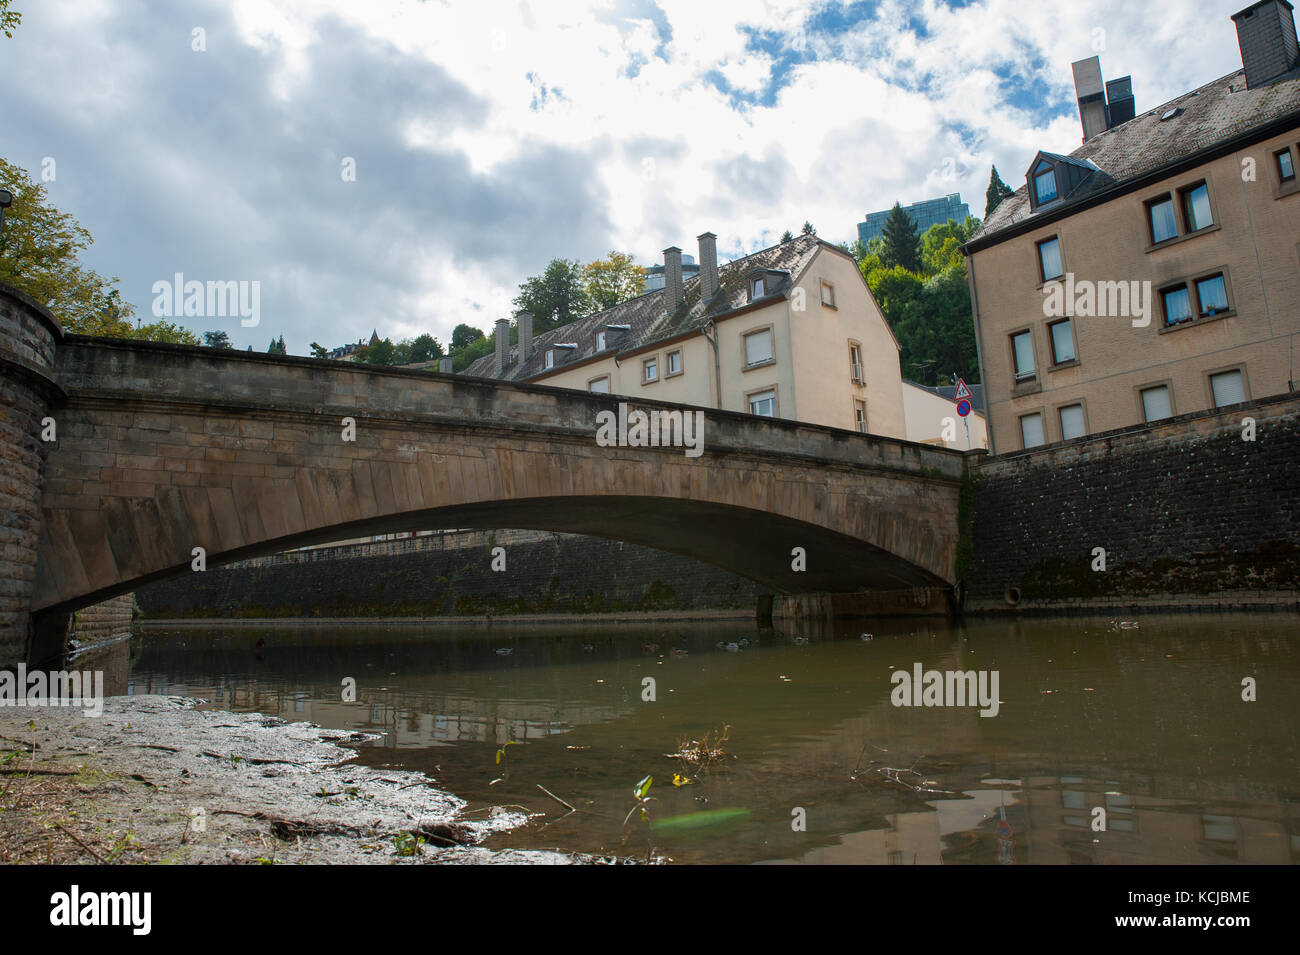 Rİver of Old Luxembourg City, Luxembourg Stock Photo